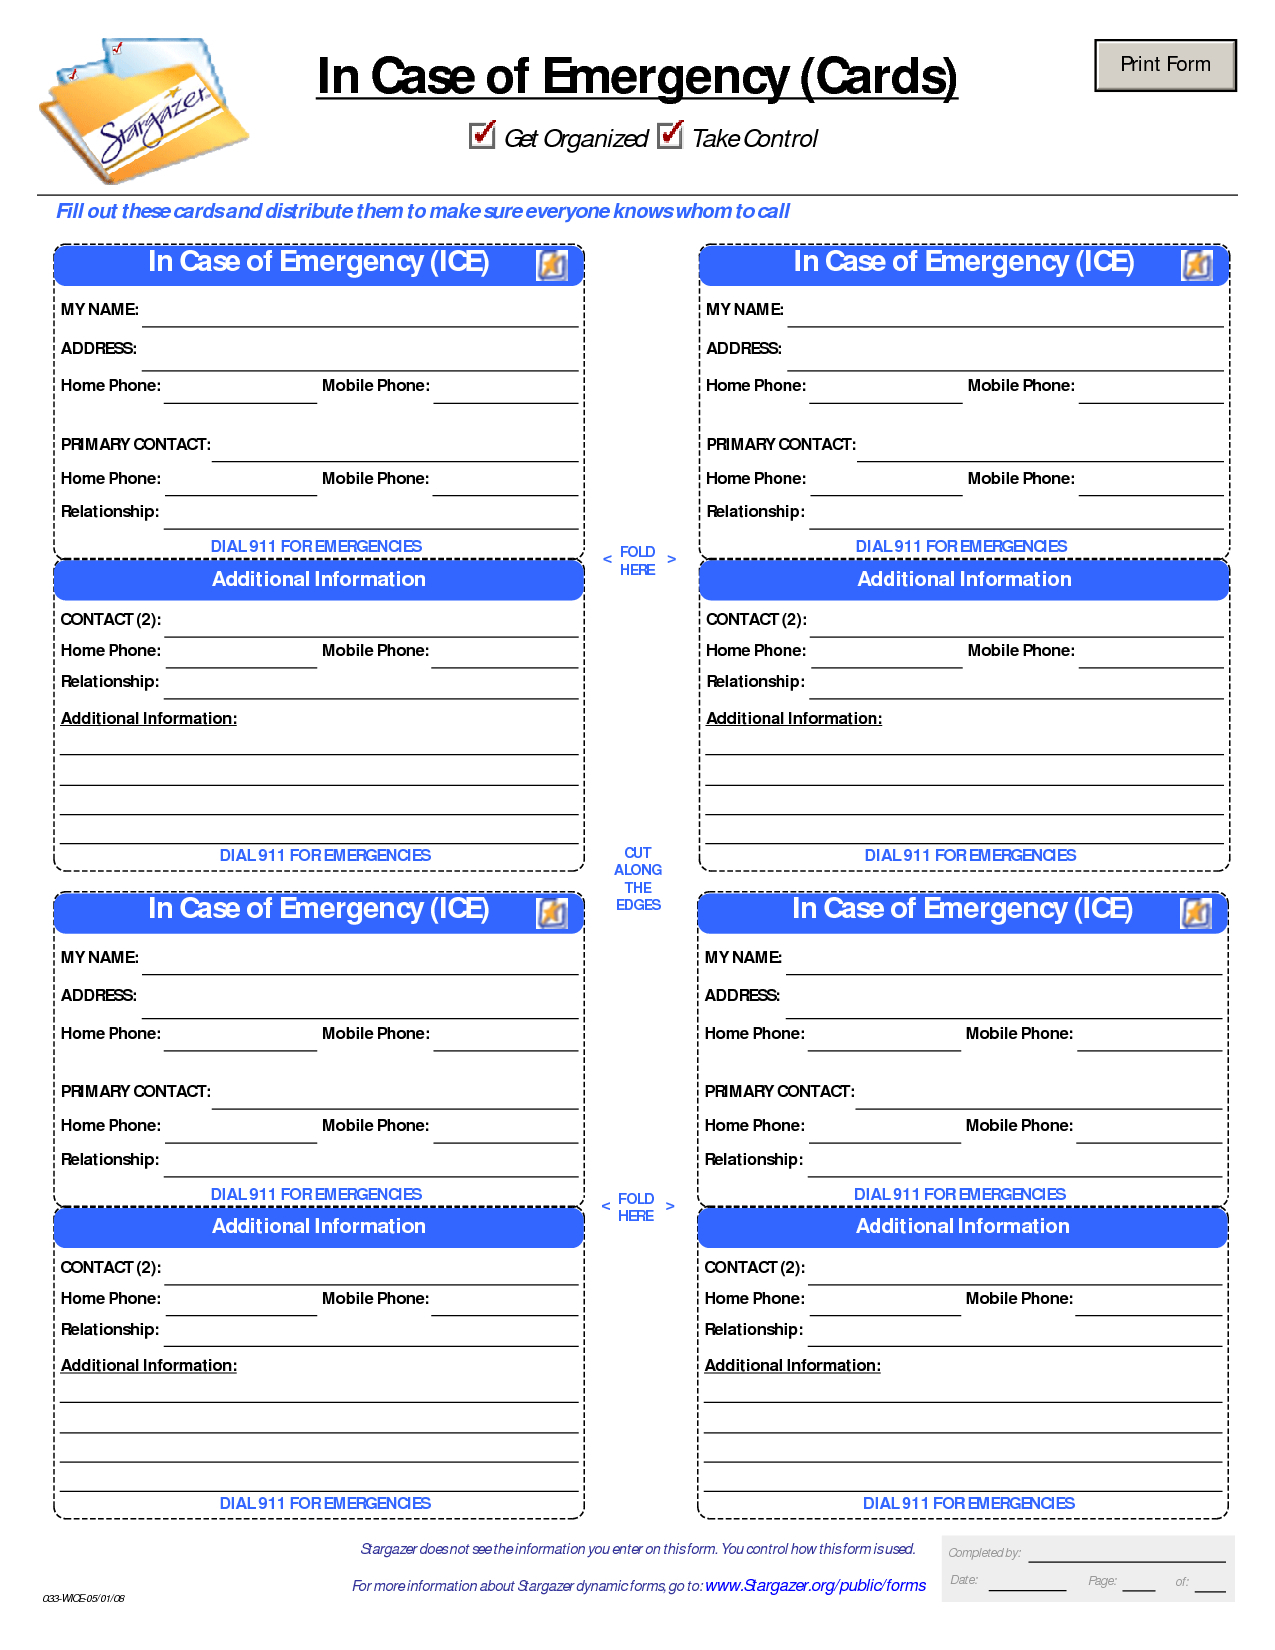 Patient Medication Card Template | Emergency Kits Throughout Medication Card Template